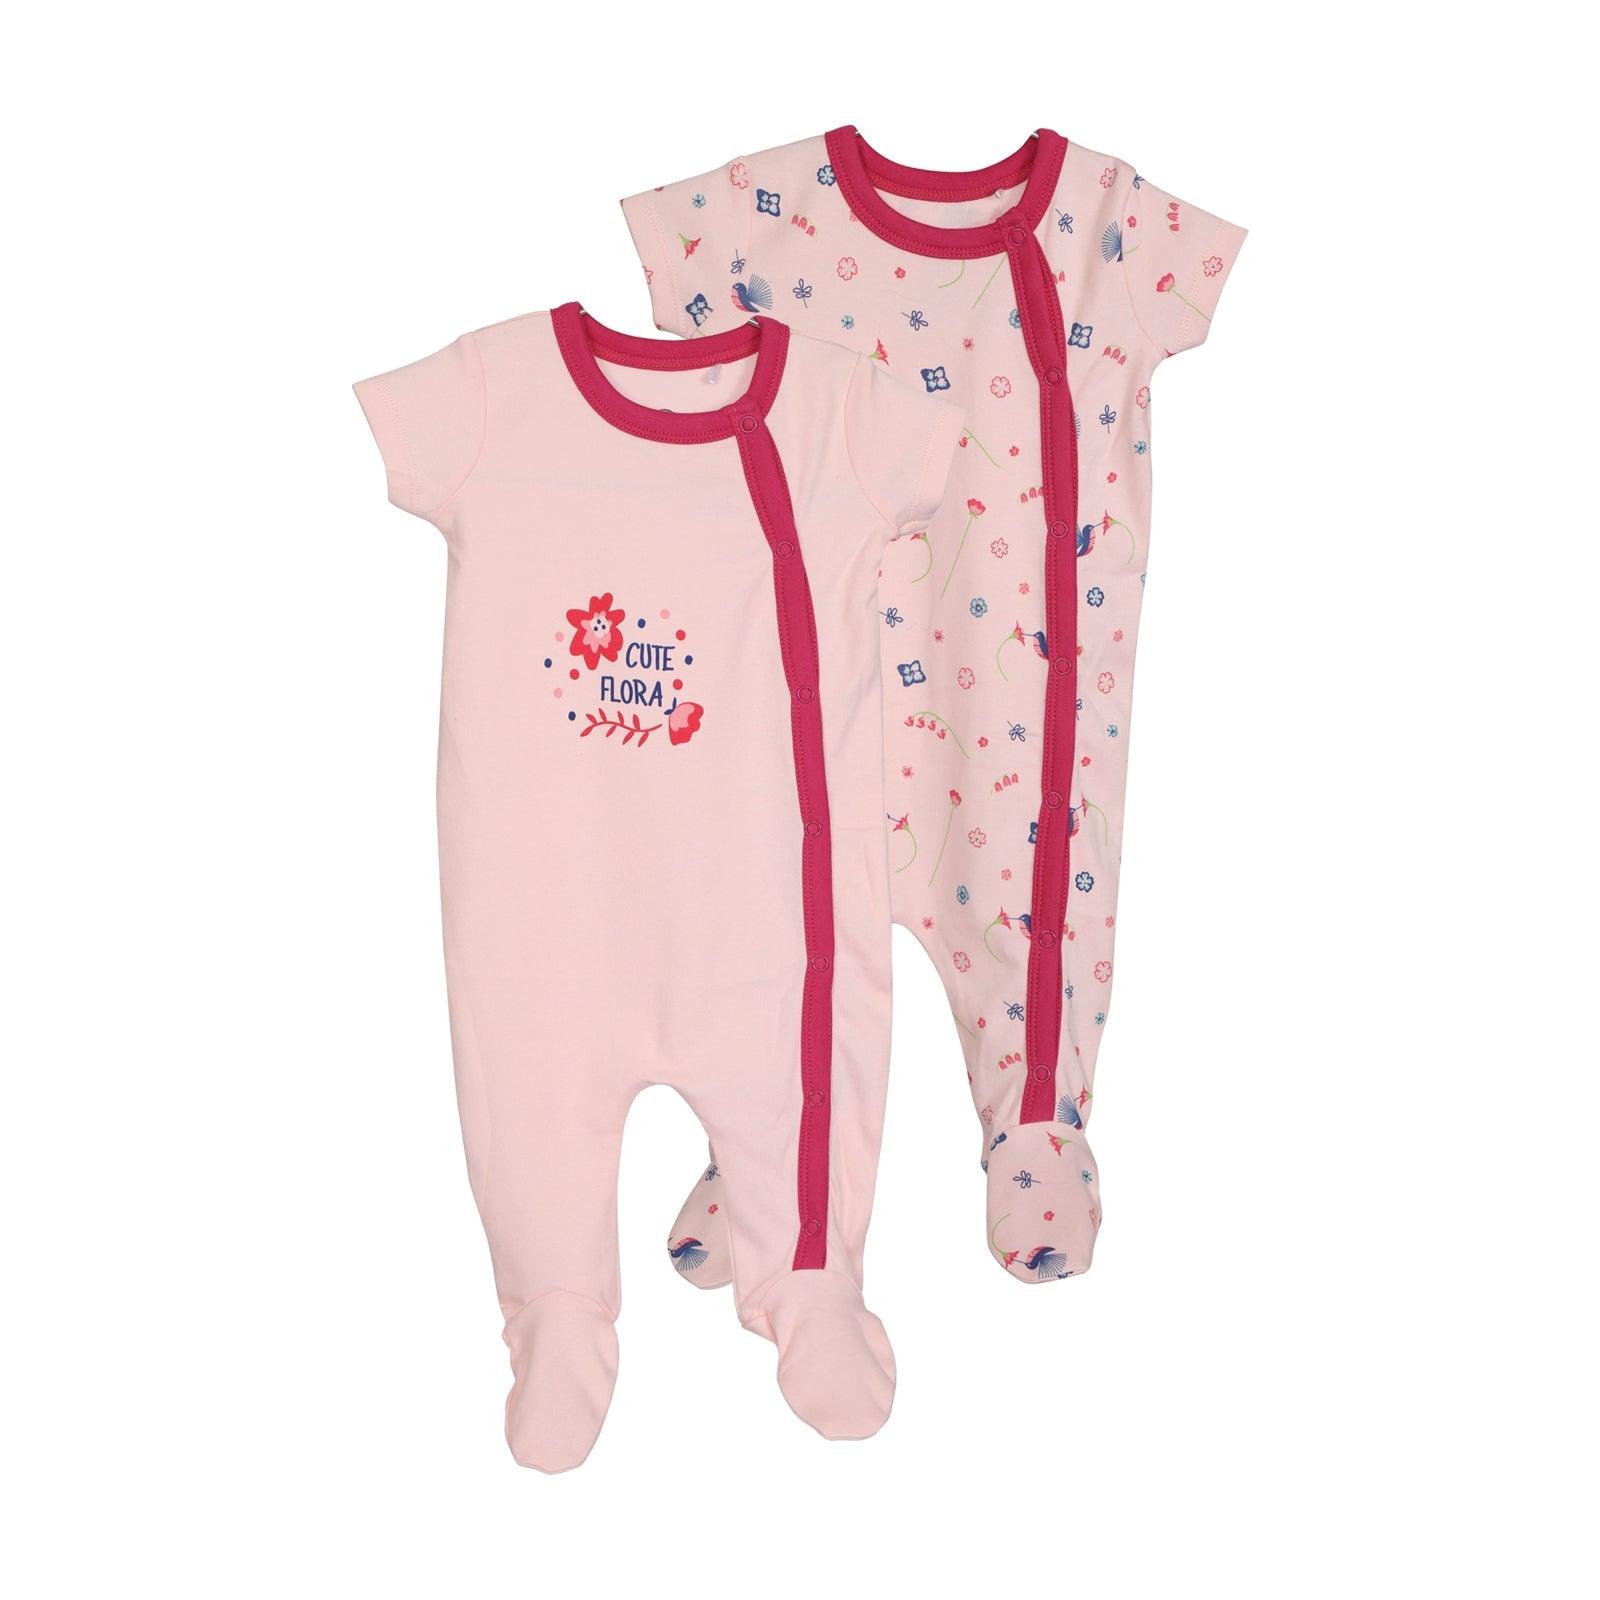 SleepSuit Pack of 2 - Juscubs